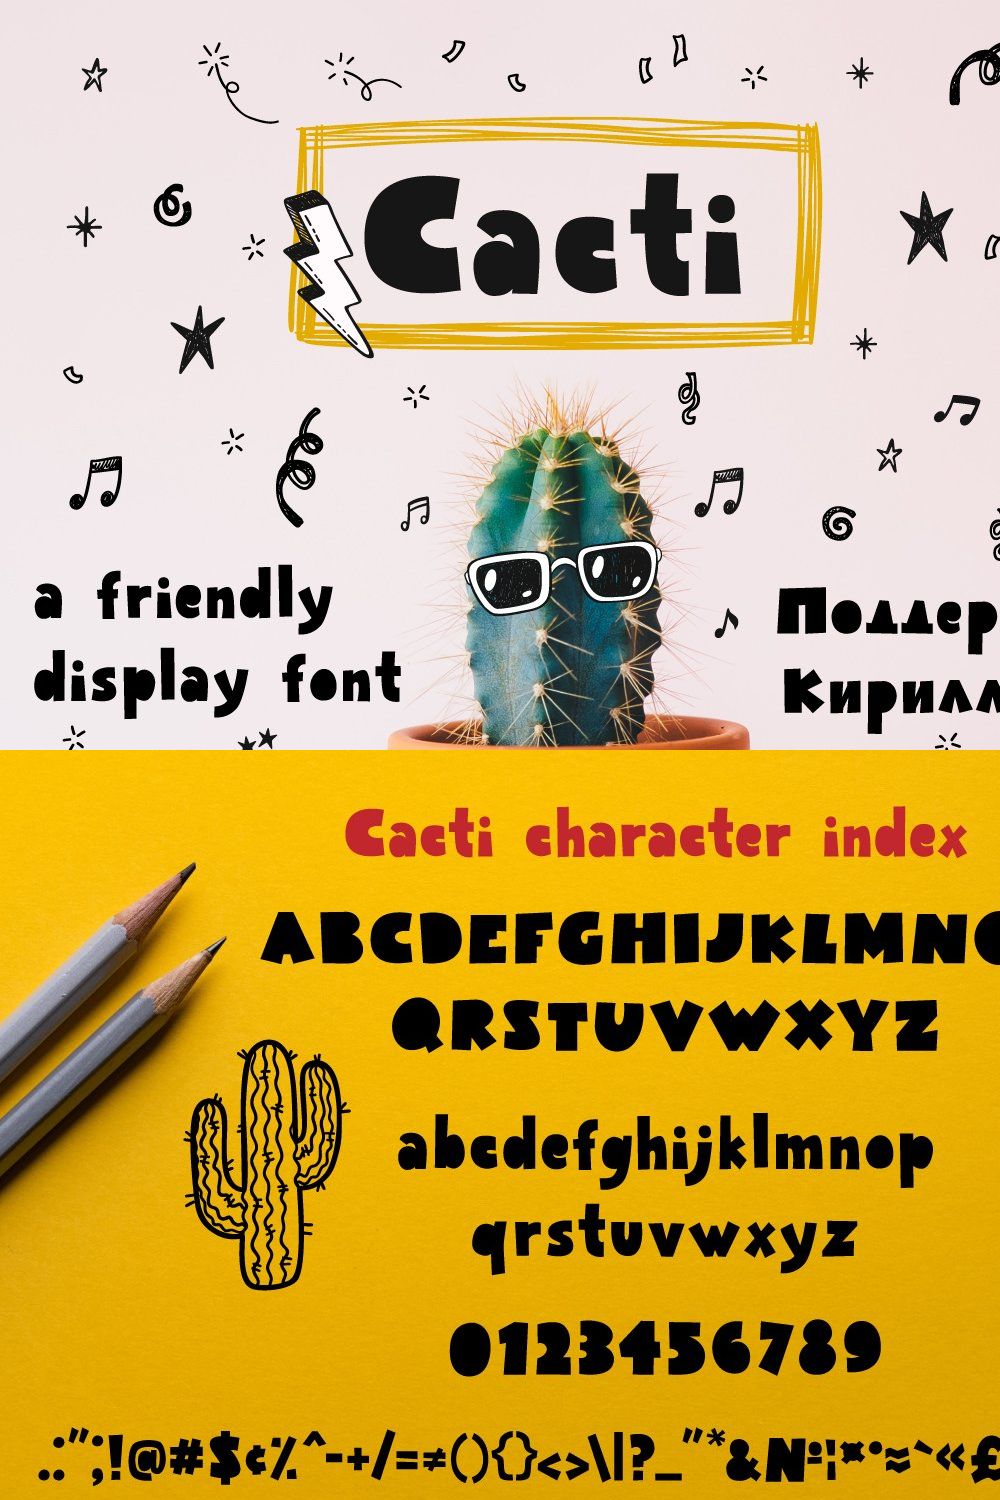 Cacti display font pinterest preview image.